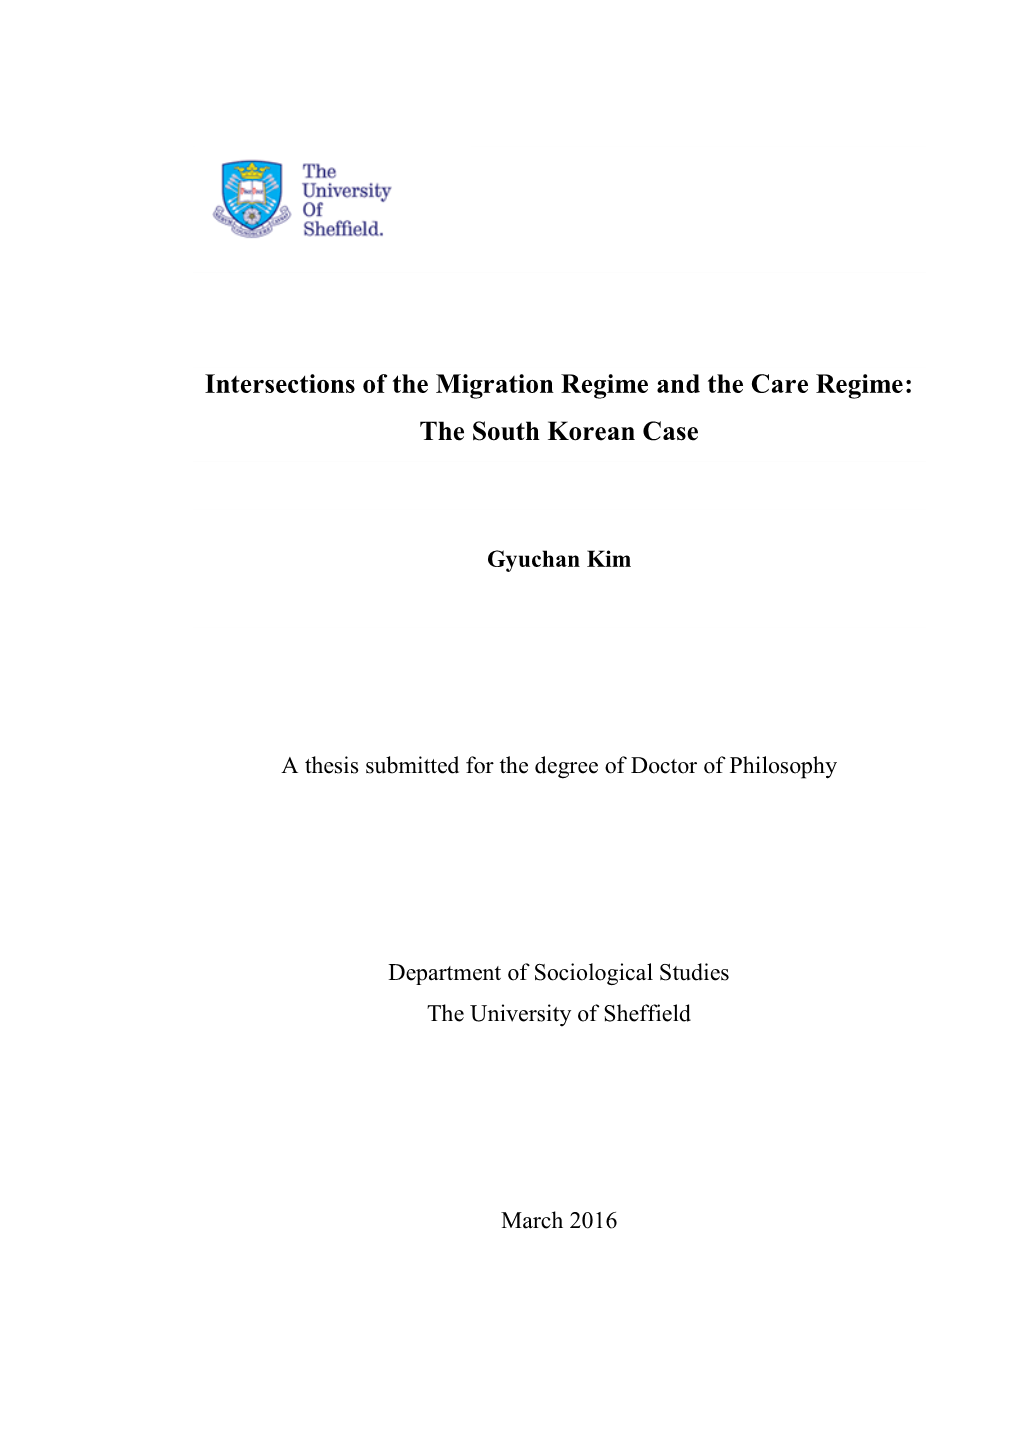 Intersections of the Migration Regime and the Care Regime: the South Korean Case